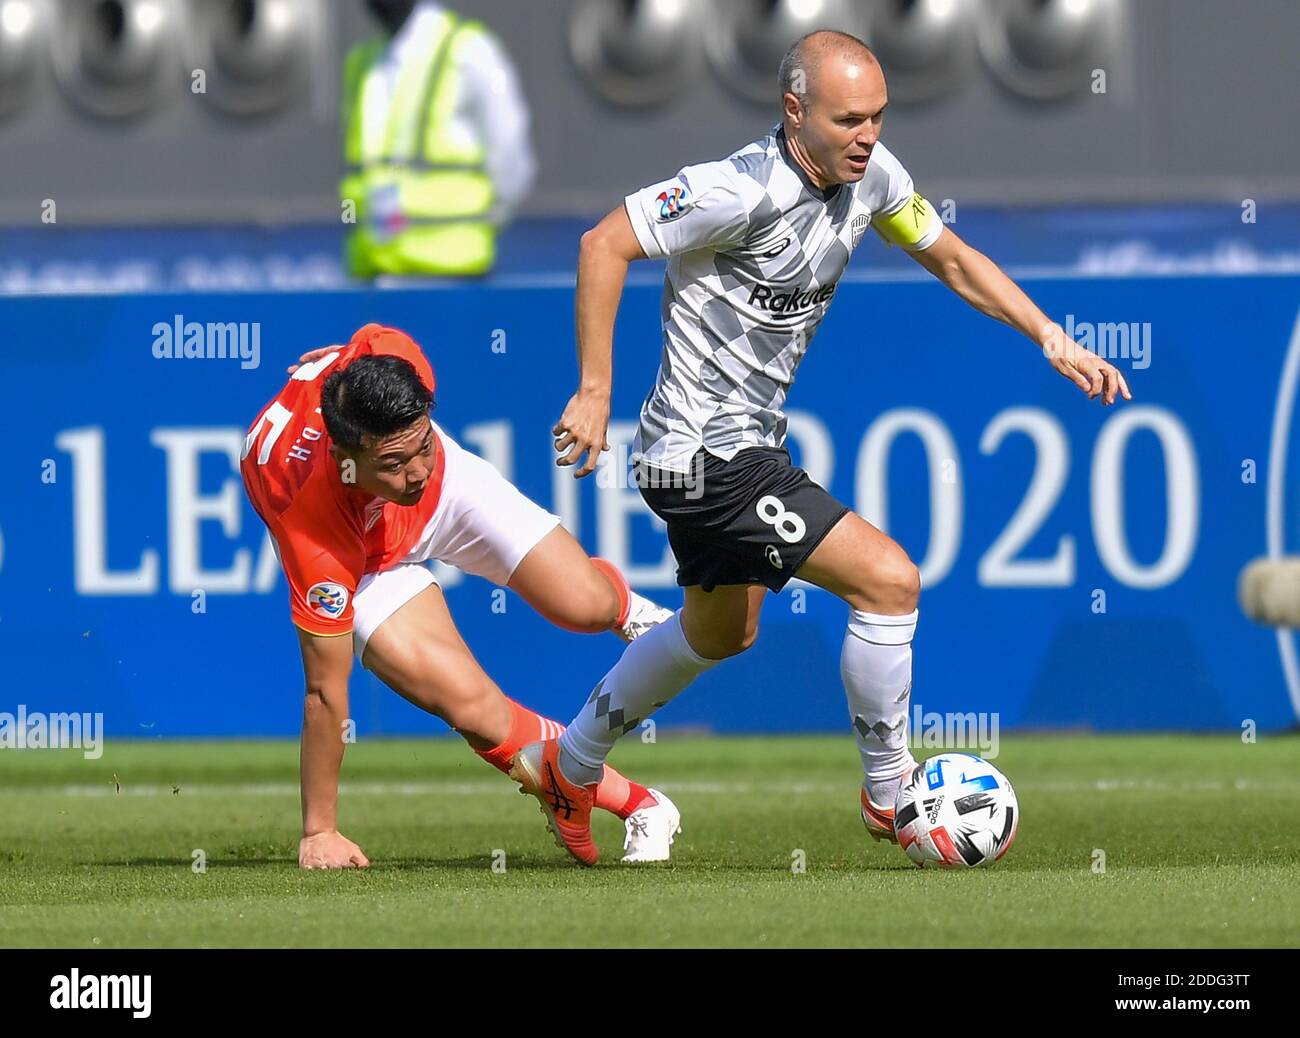 Doha, Qatar. 25th Nov, 2020. Andres Iniesta (R) of Vissel Kobe vies with Yan Dinghao of Guangzhou Evergrande FC during a Group G football match of the AFC Champions League in Doha, Qatar, Nov. 25, 2020. Credit: Nikku/Xinhua/Alamy Live News Stock Photo